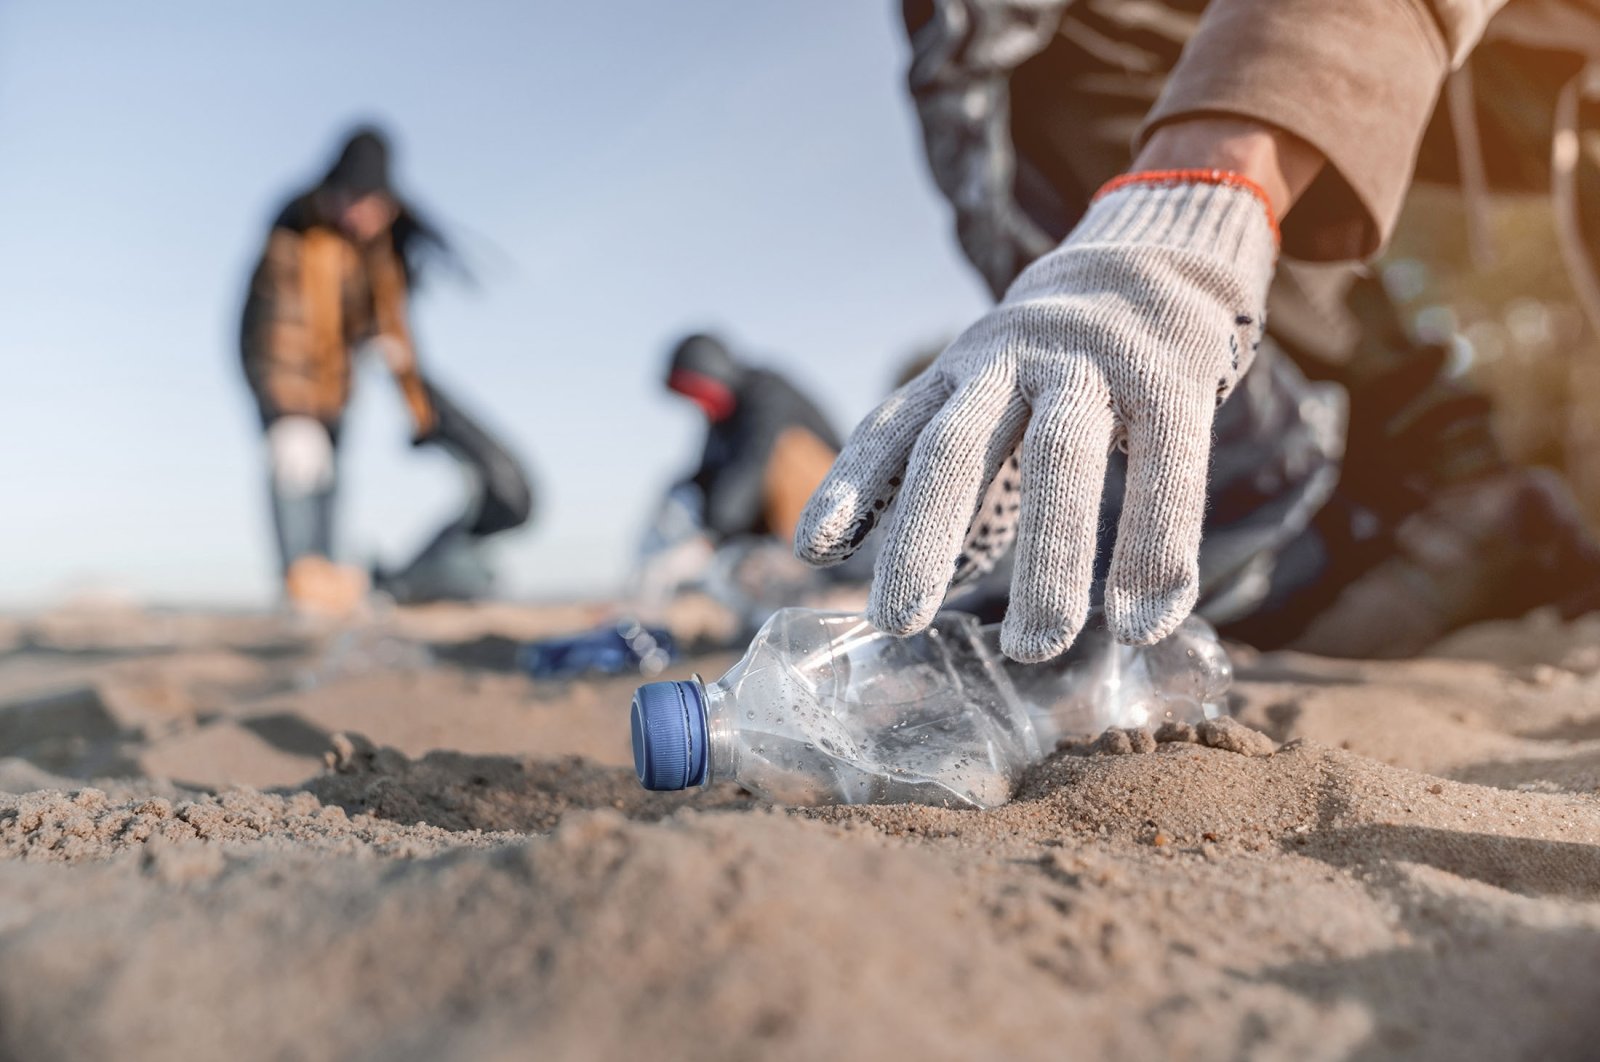 Travel more sustainably by taking these steps to avoid plastic waste. (Shutterstock Photo) 

